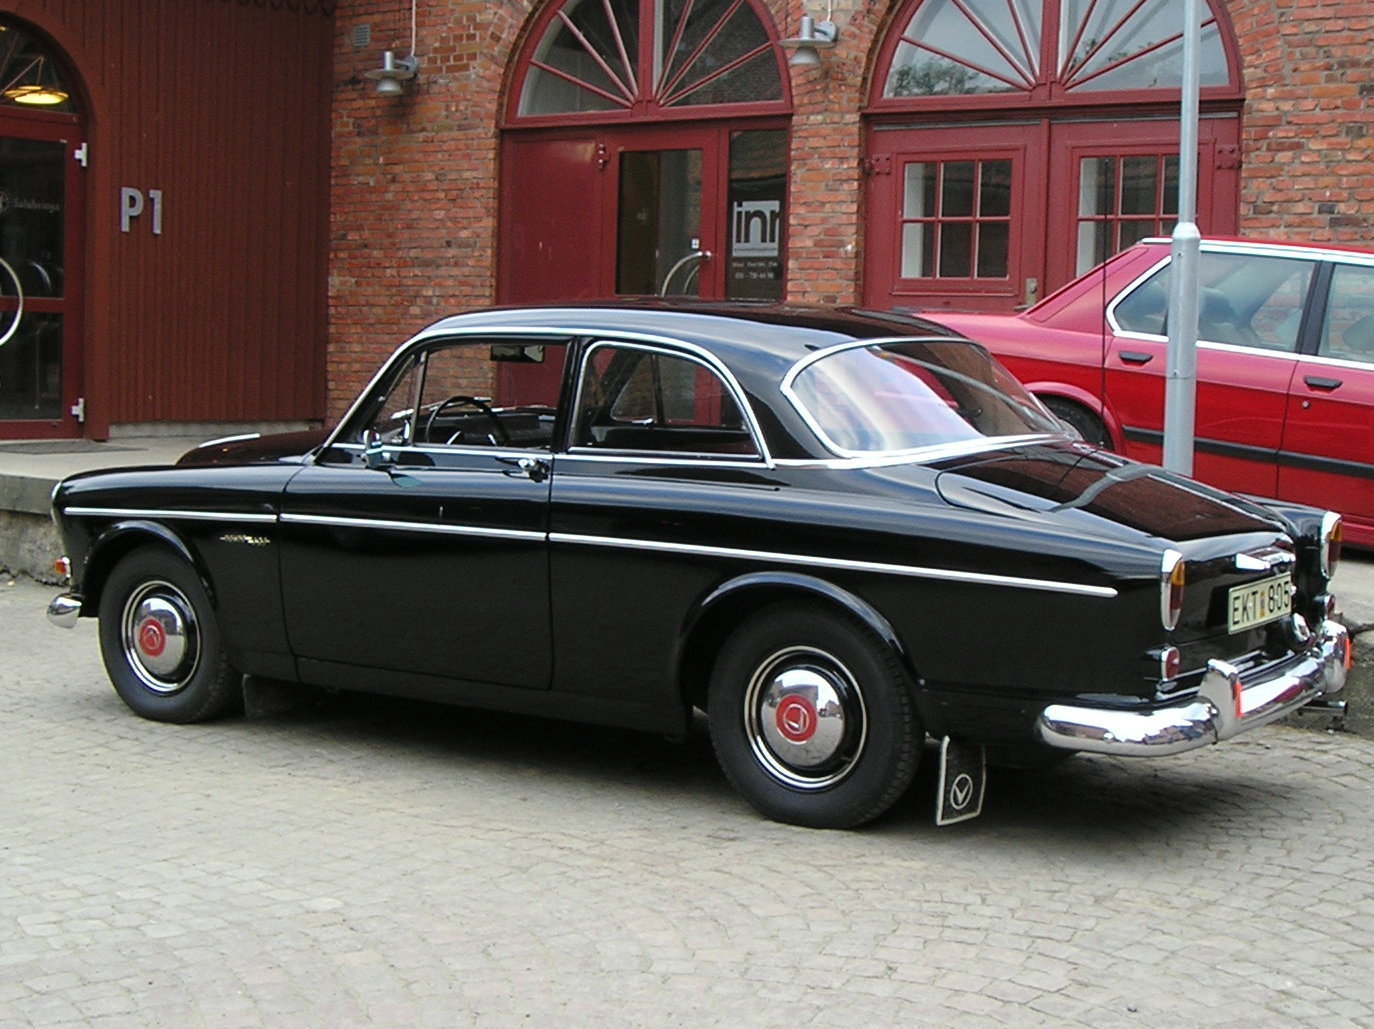 Volvo 121 Amazon 2dr. View Download Wallpaper. 1374x1029. Comments